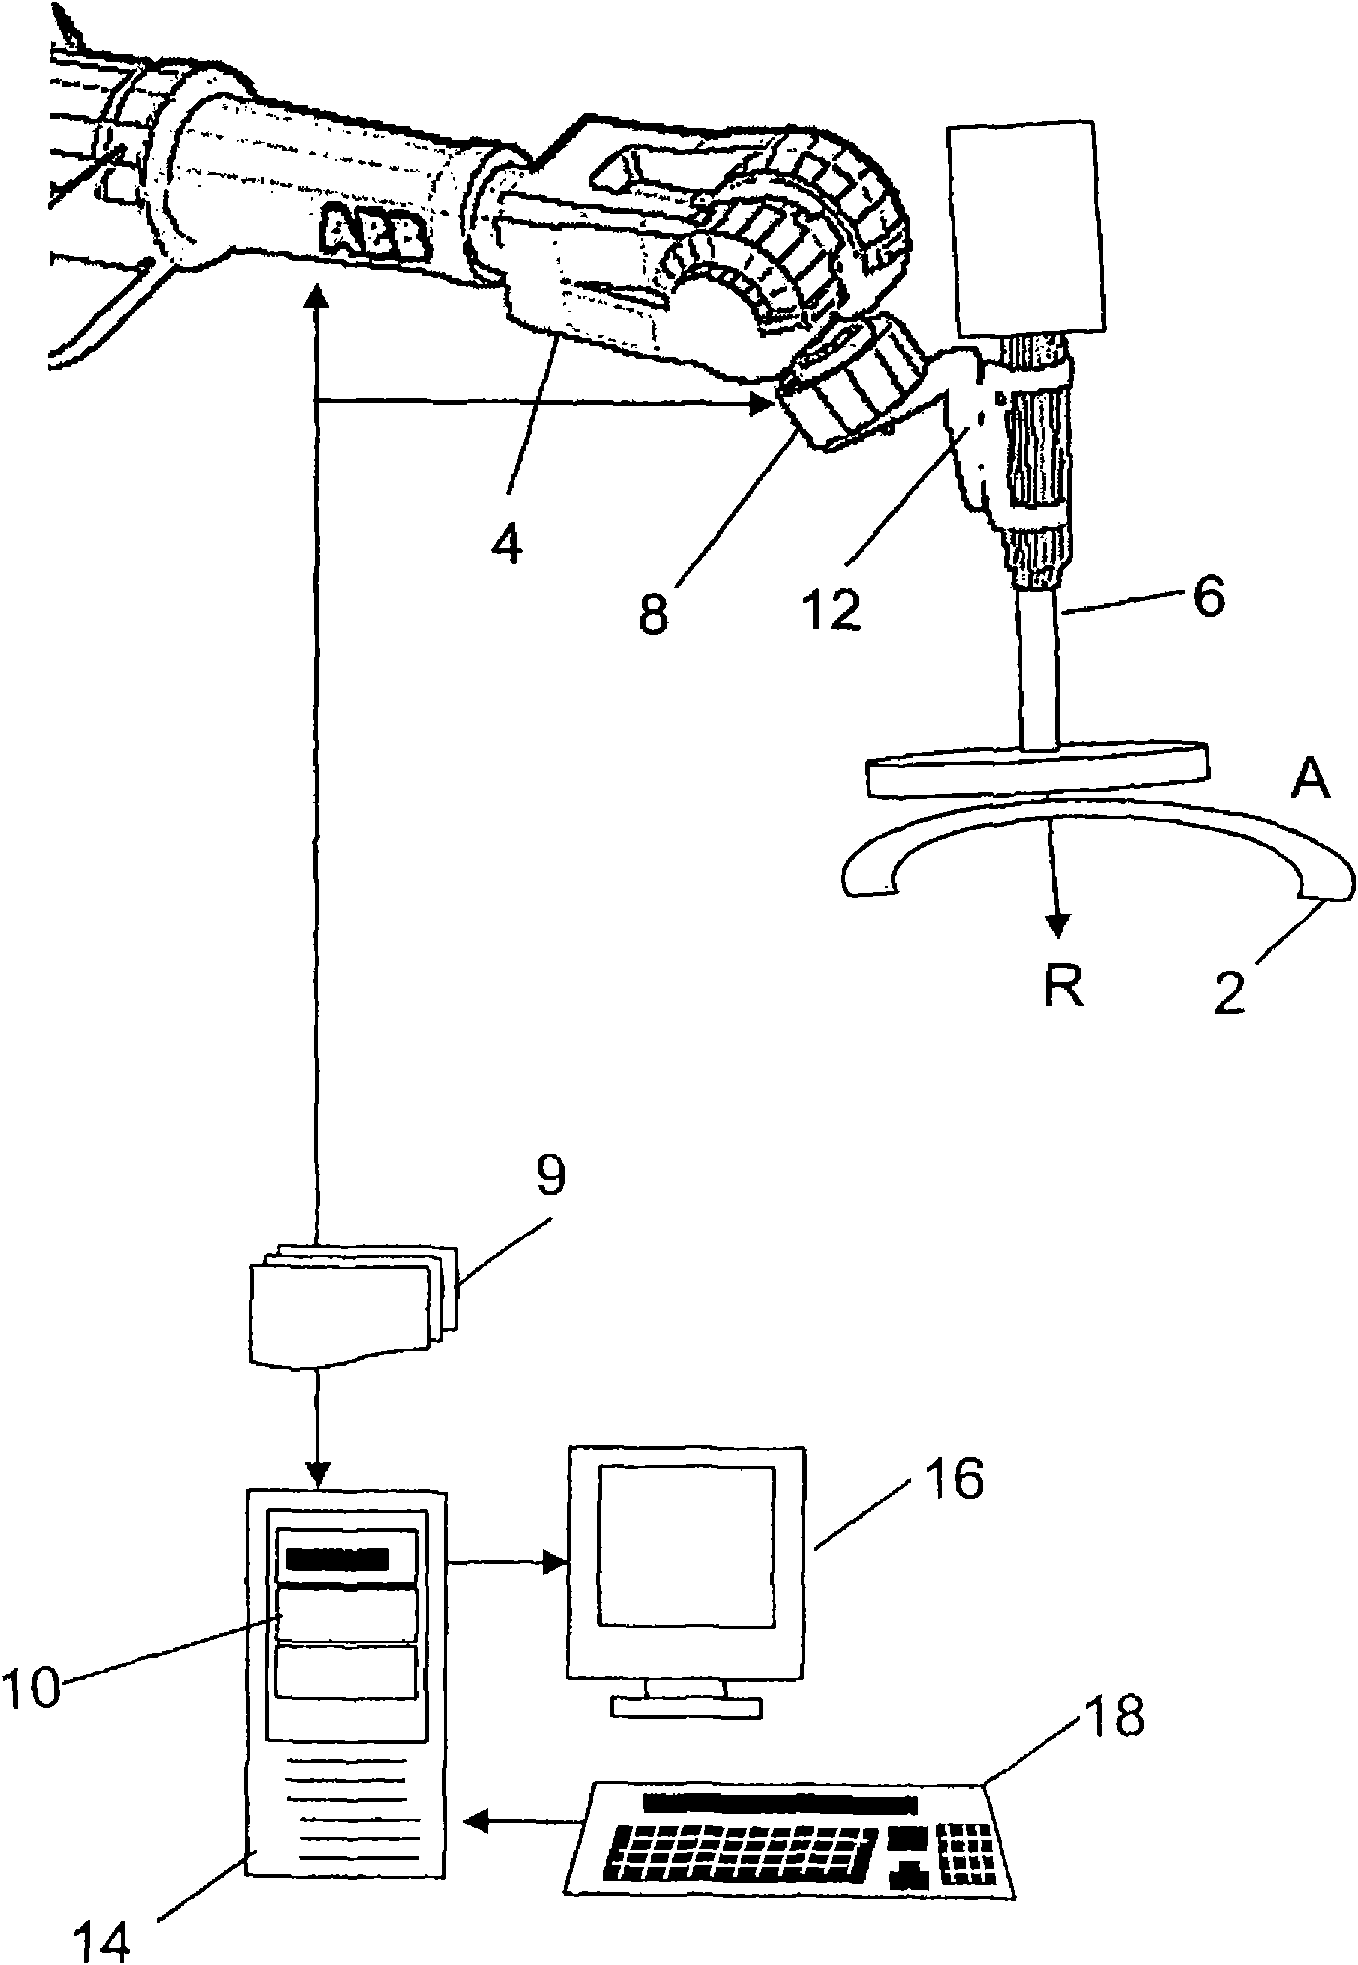 System and method for automatically processing and/or machining workpieces